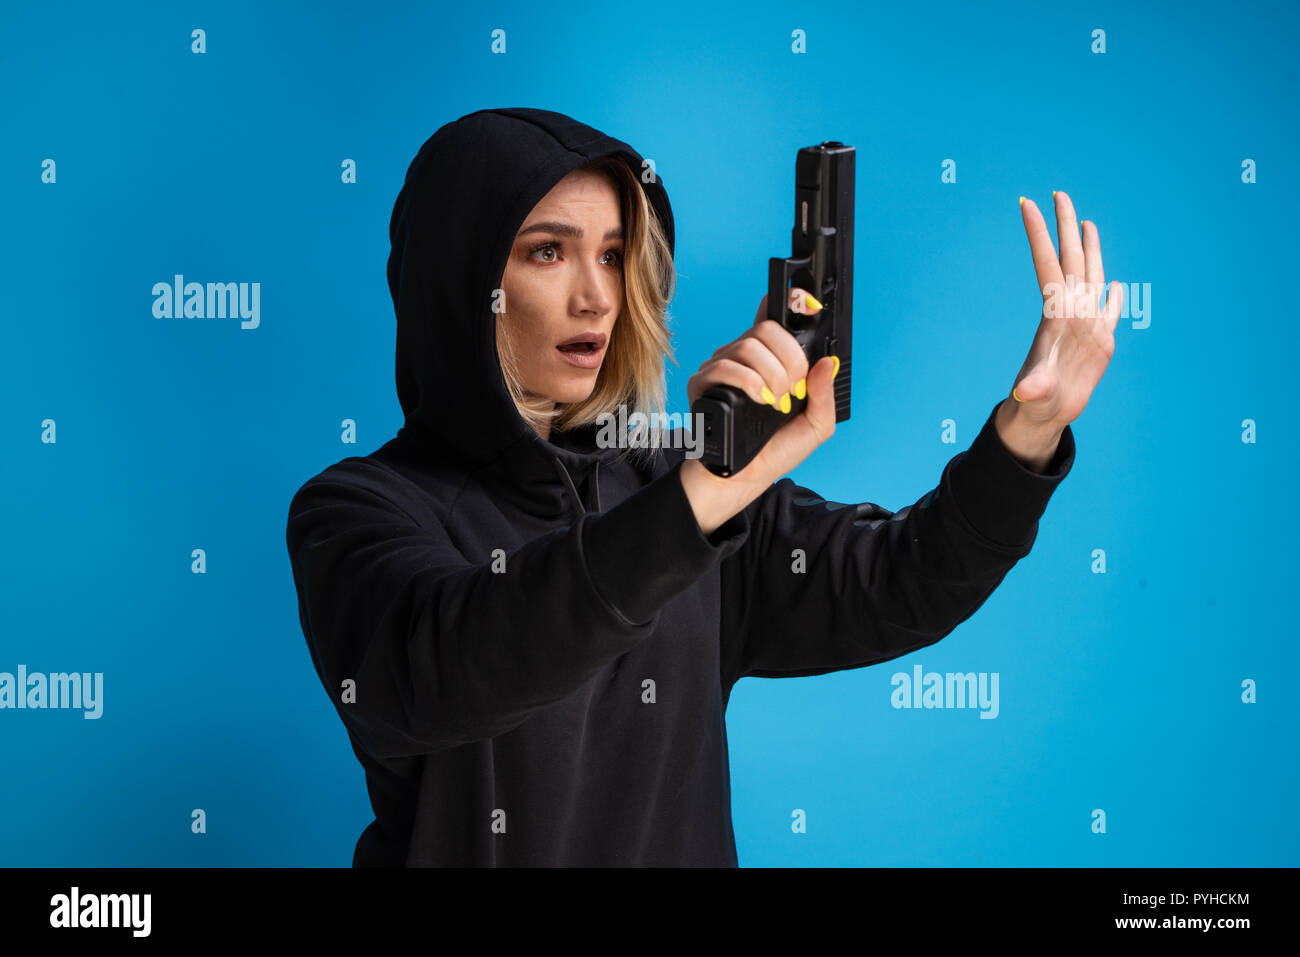 Hooded young girl presenting gun while surrendering. Airsoft game loser Stock Photo